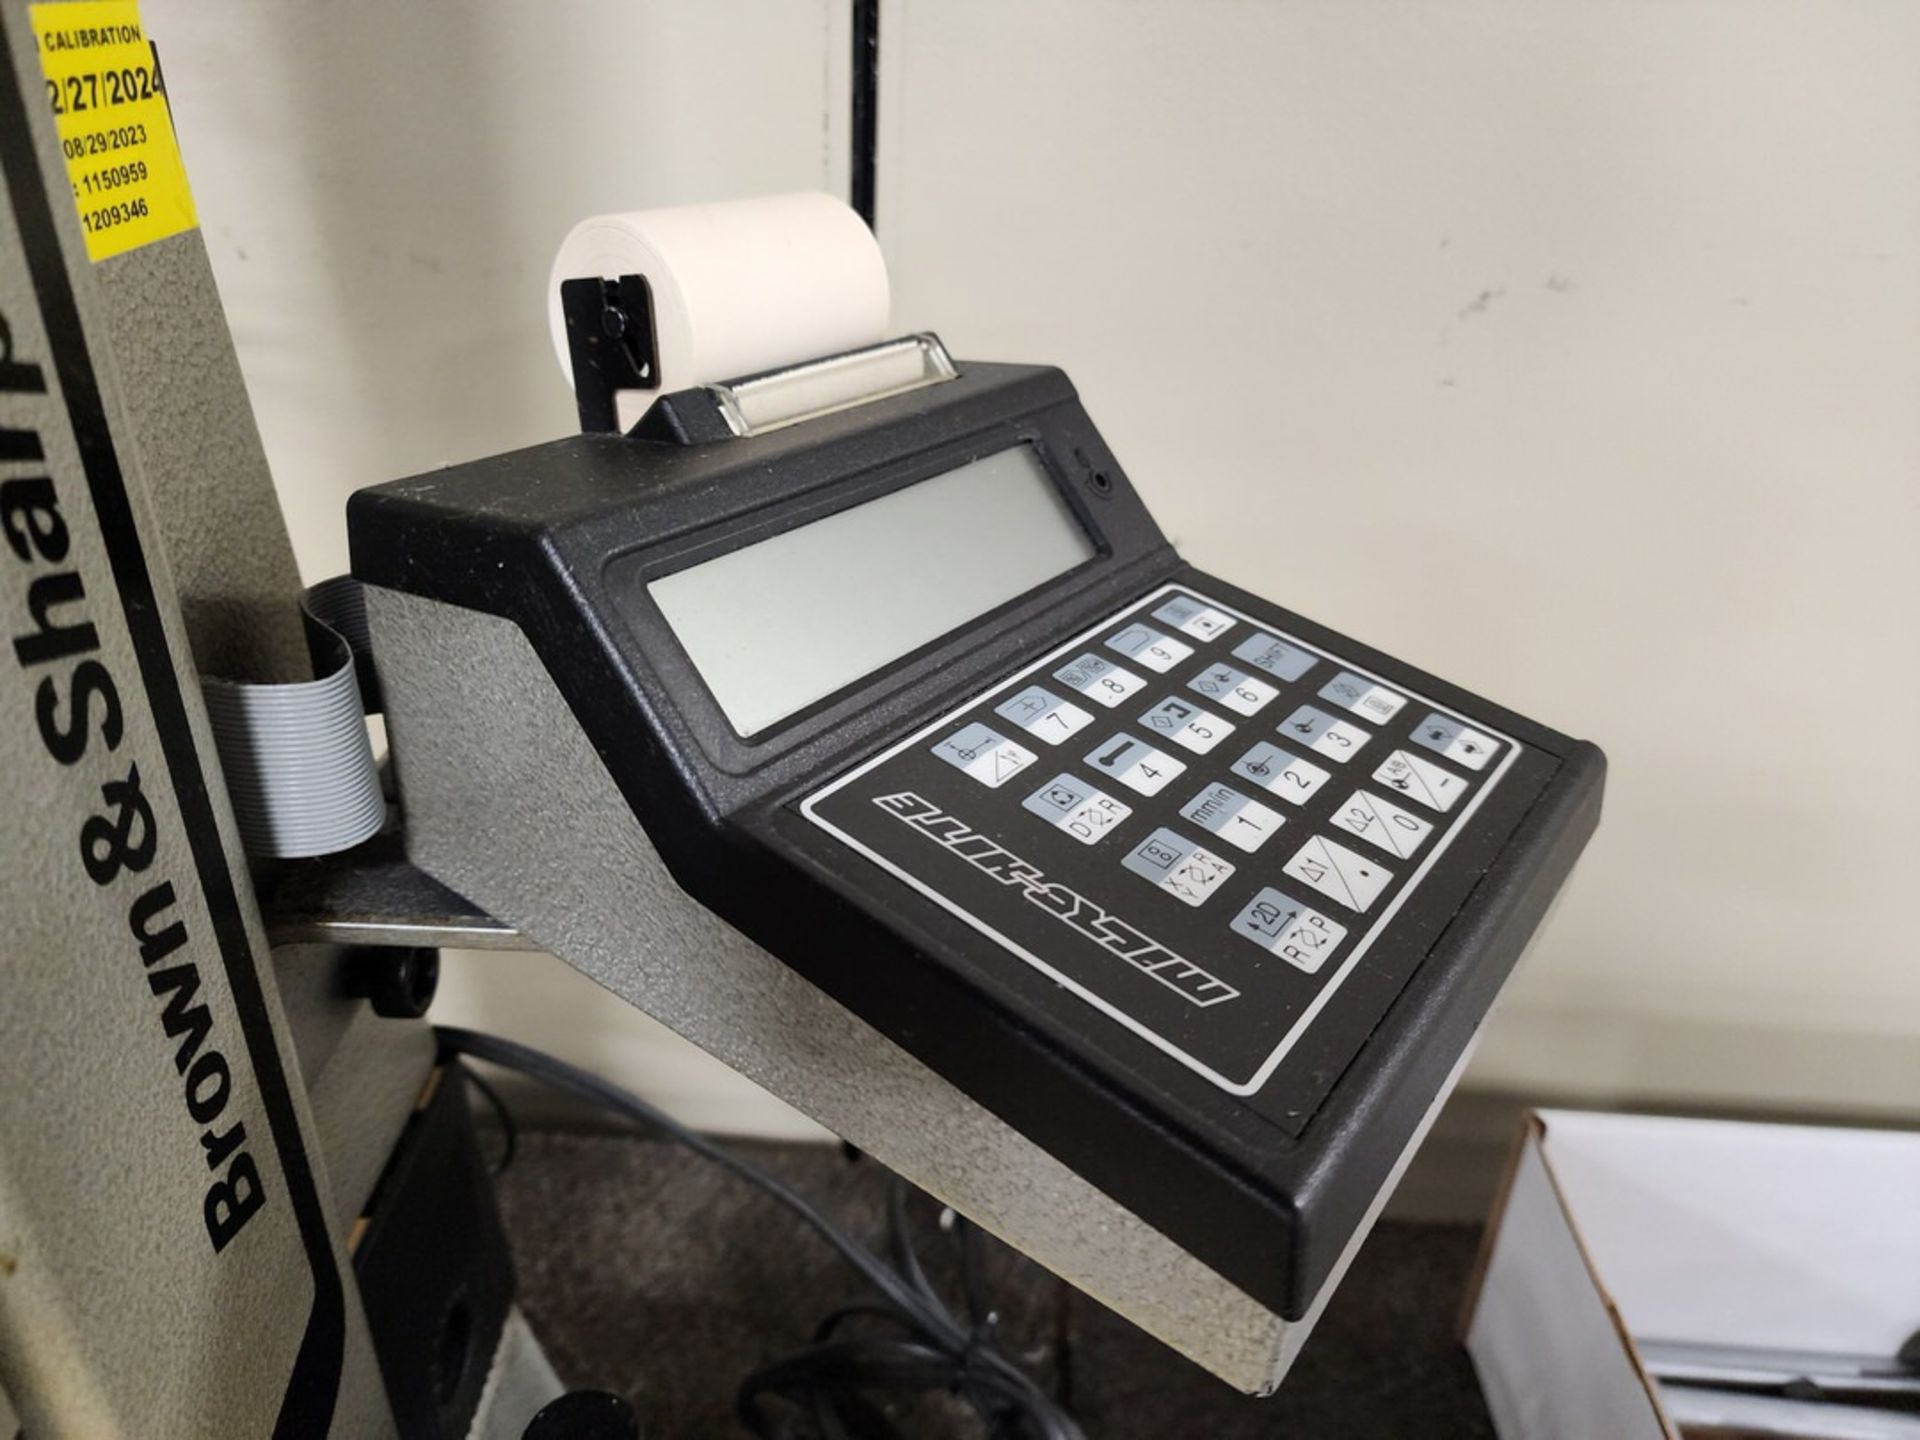 B&S Micro-Hite Height Gage W/ Tooling - Image 7 of 10